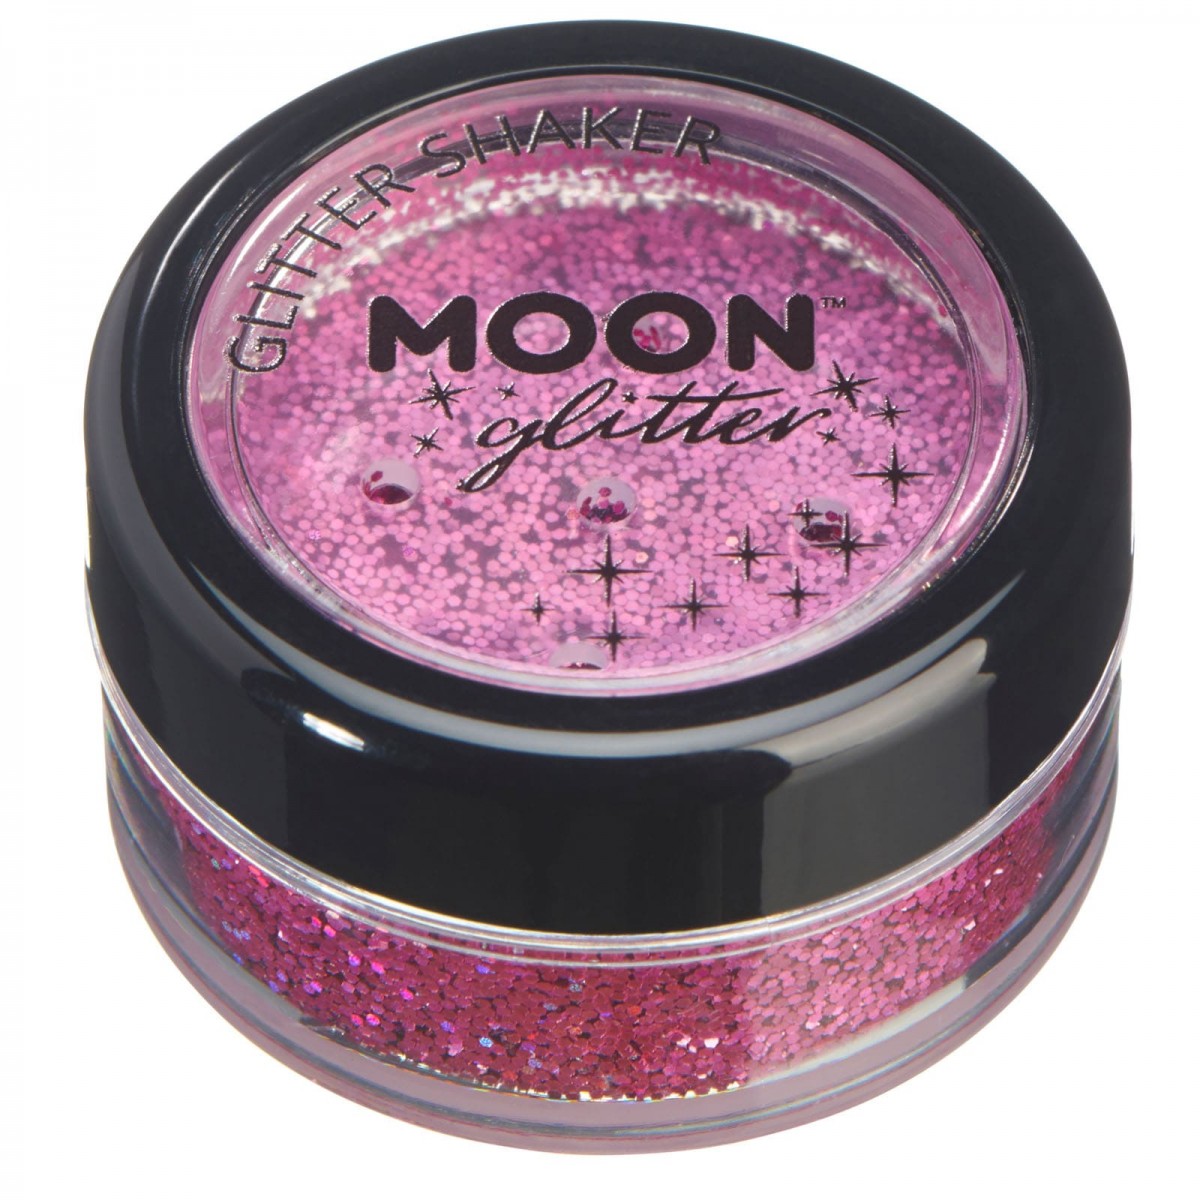 MOON CREATIONS G16 HOLOGRAPHIC GLITTER SHAKER PINK 5g